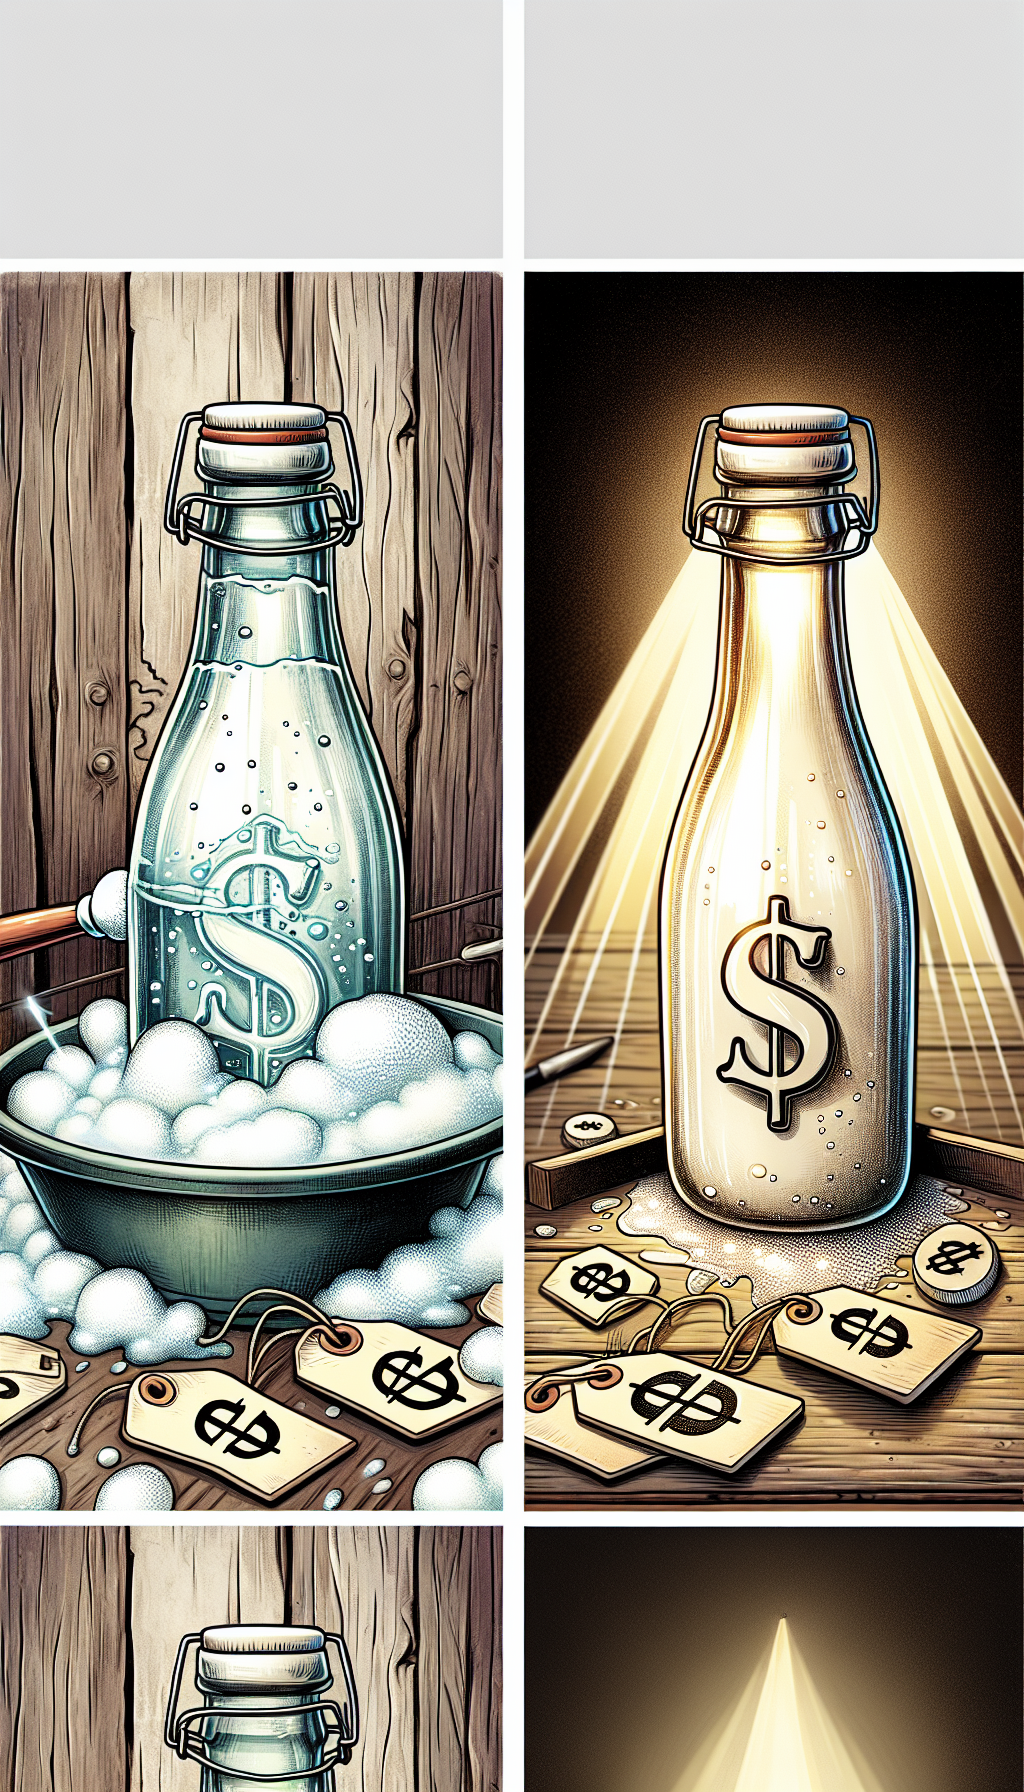 An illustration depicts a gleaming, vintage milk bottle, half submerged in soapy water against a rustic backdrop, transitioning to a spotlighted display on an antique wooden shelf. Surrounding the bottle are small tags with dollar signs, subtly implying its value, while soft, nostalgic tones and distinct line art styles differentiate the cleaning and showcasing sections.